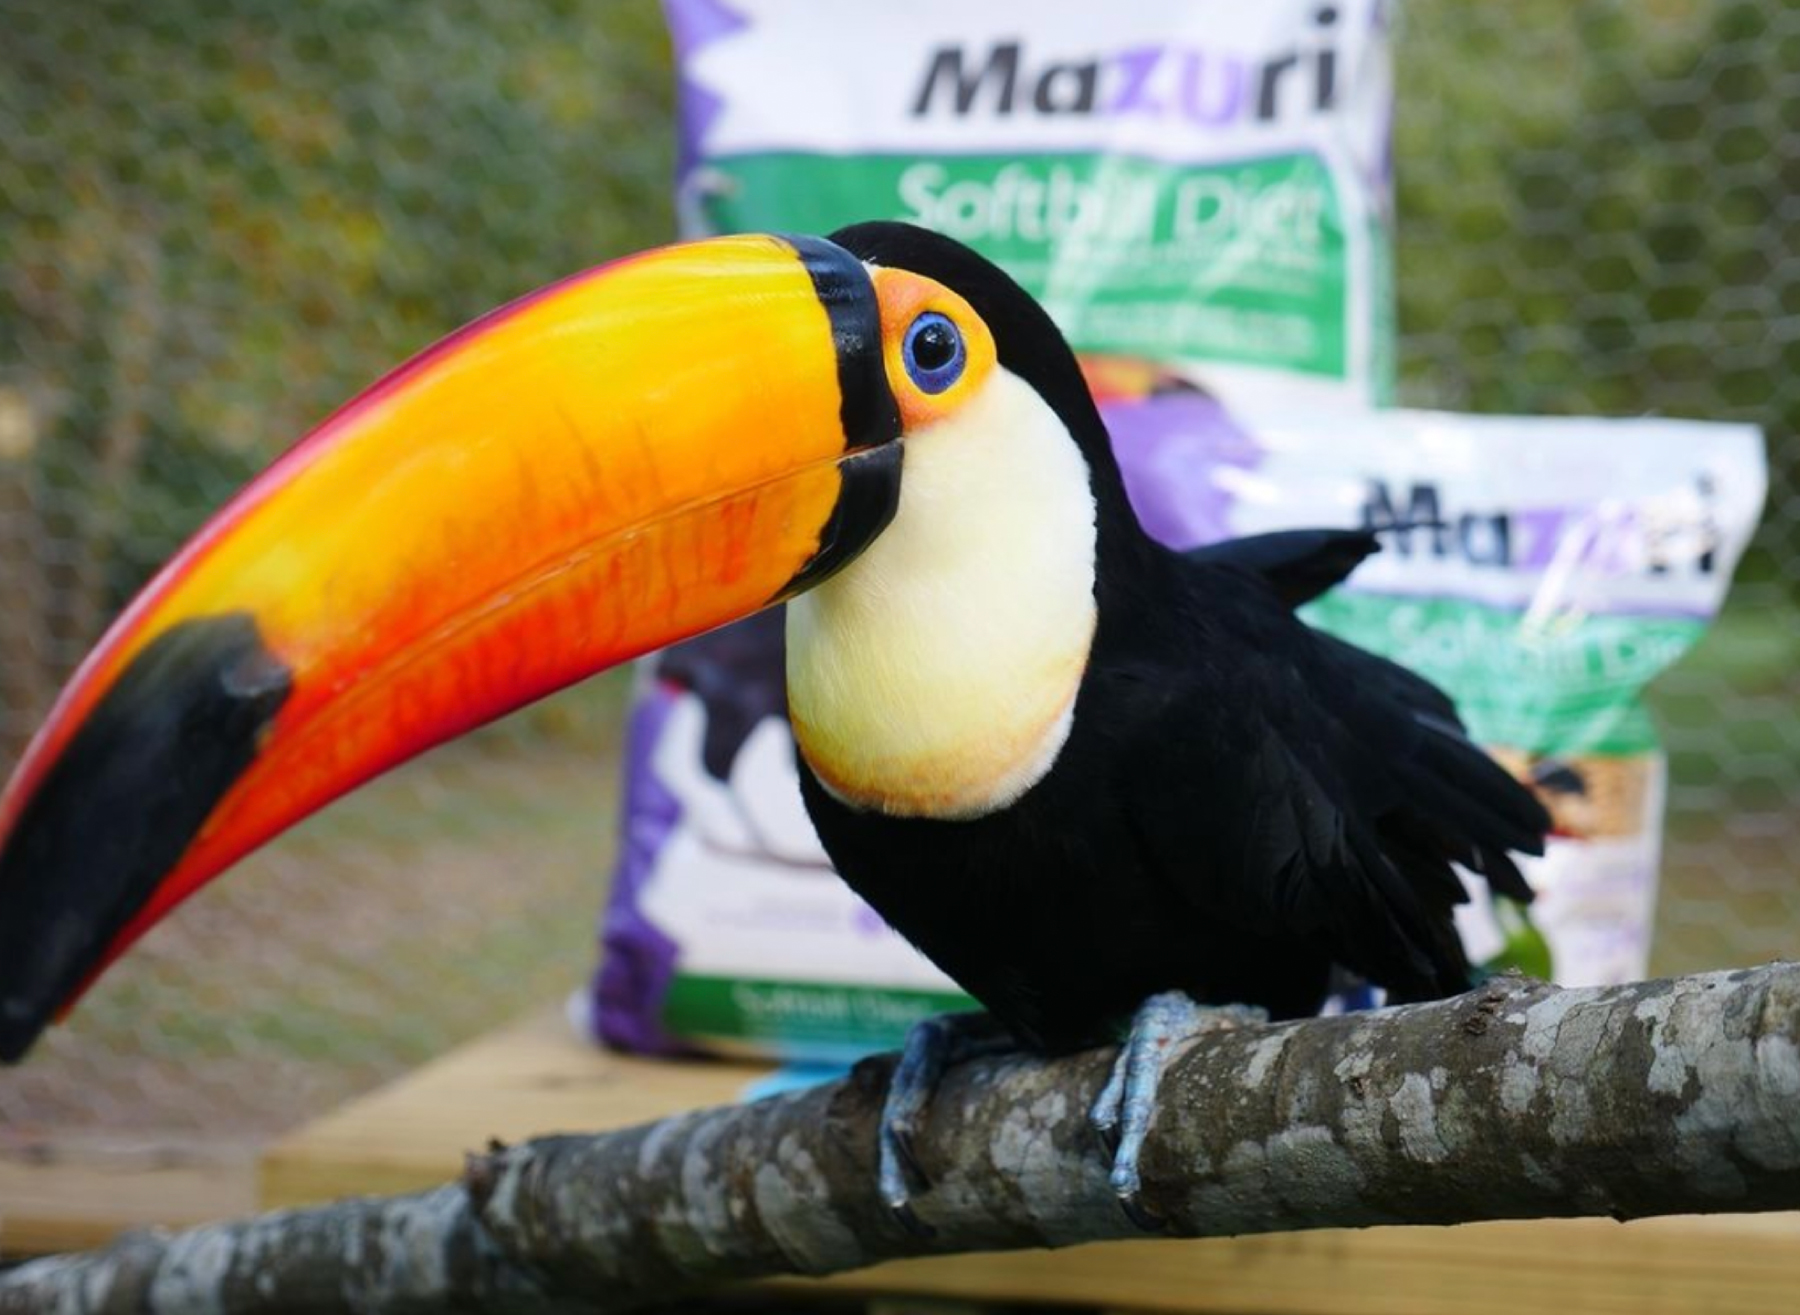 Image of a tucan with some Mazuri food packaging in the background